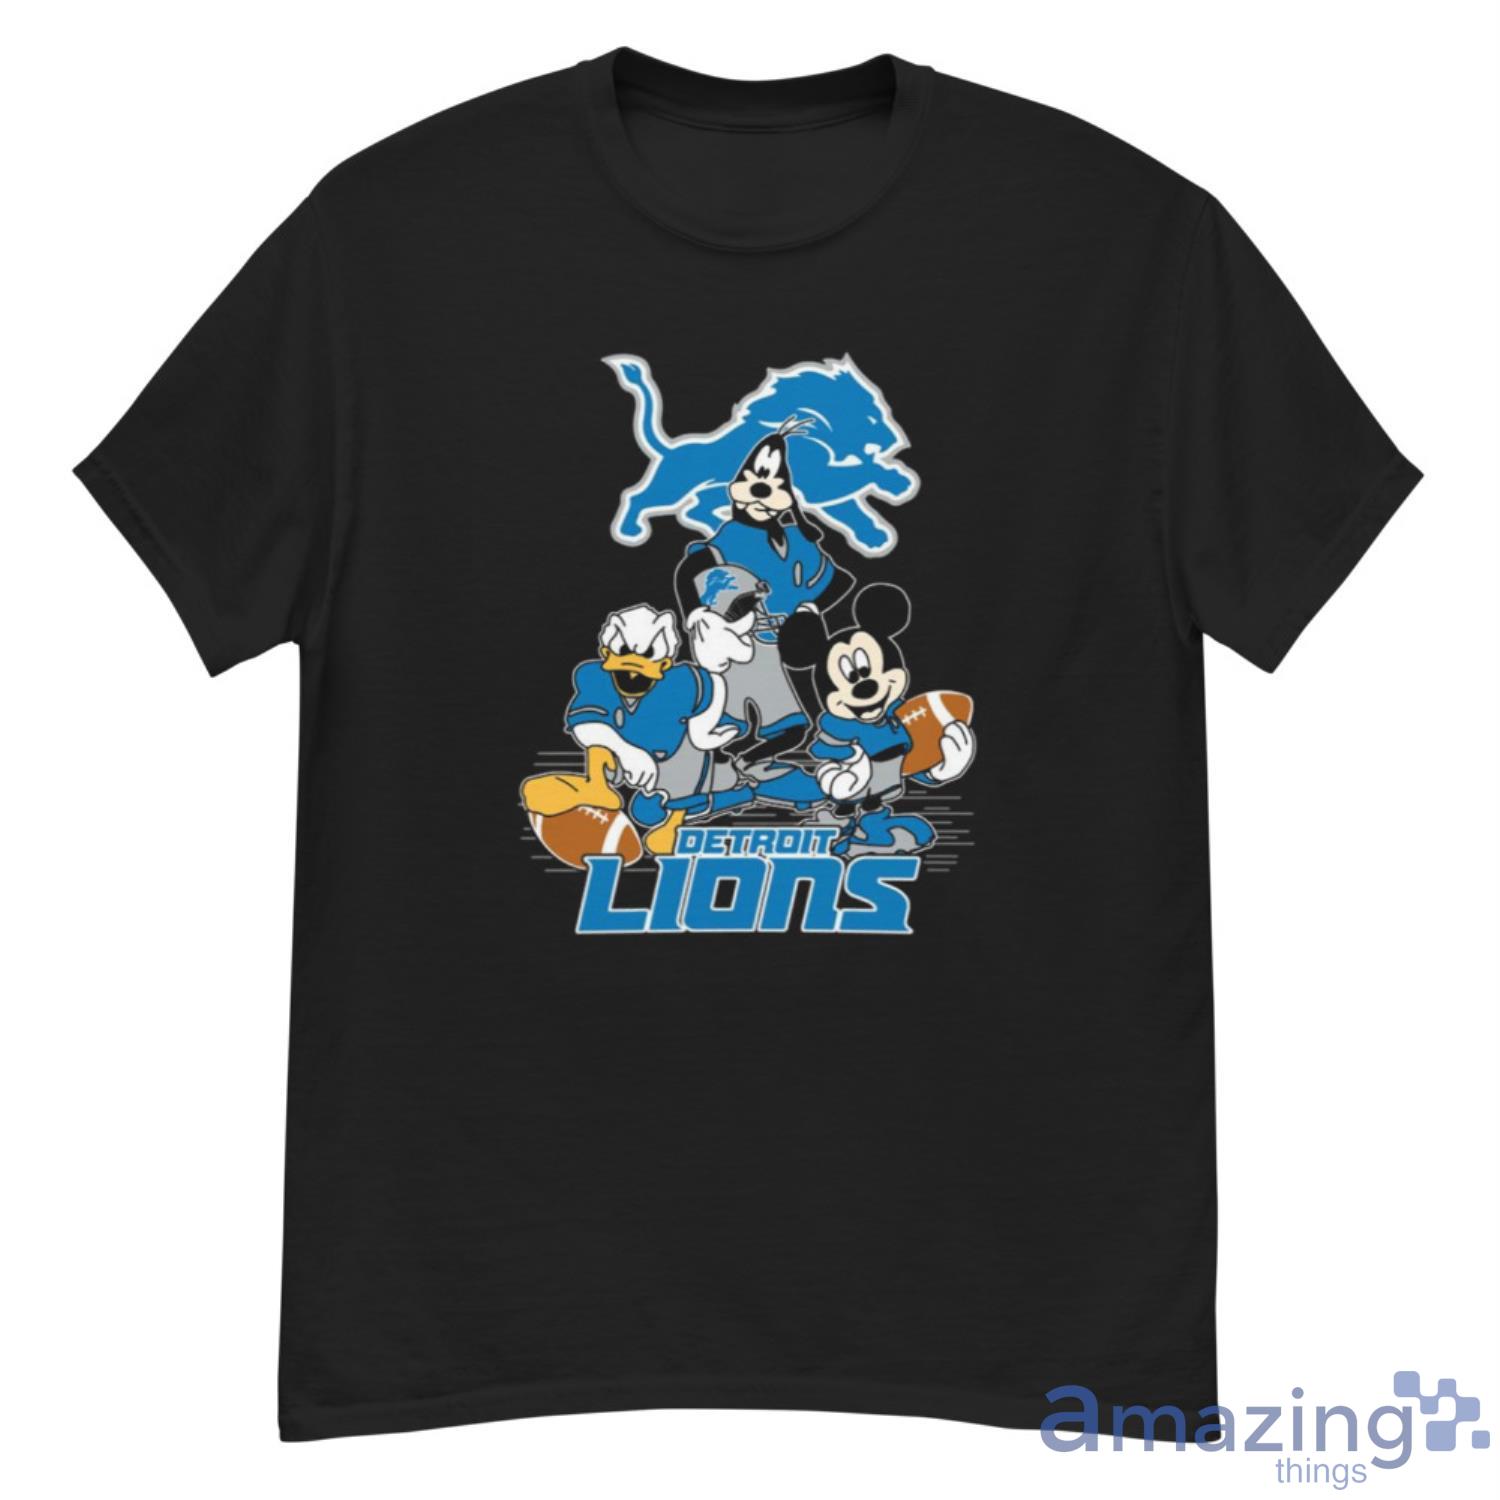 Donald Duck Birthday 2023 White T-Shirt for Adults